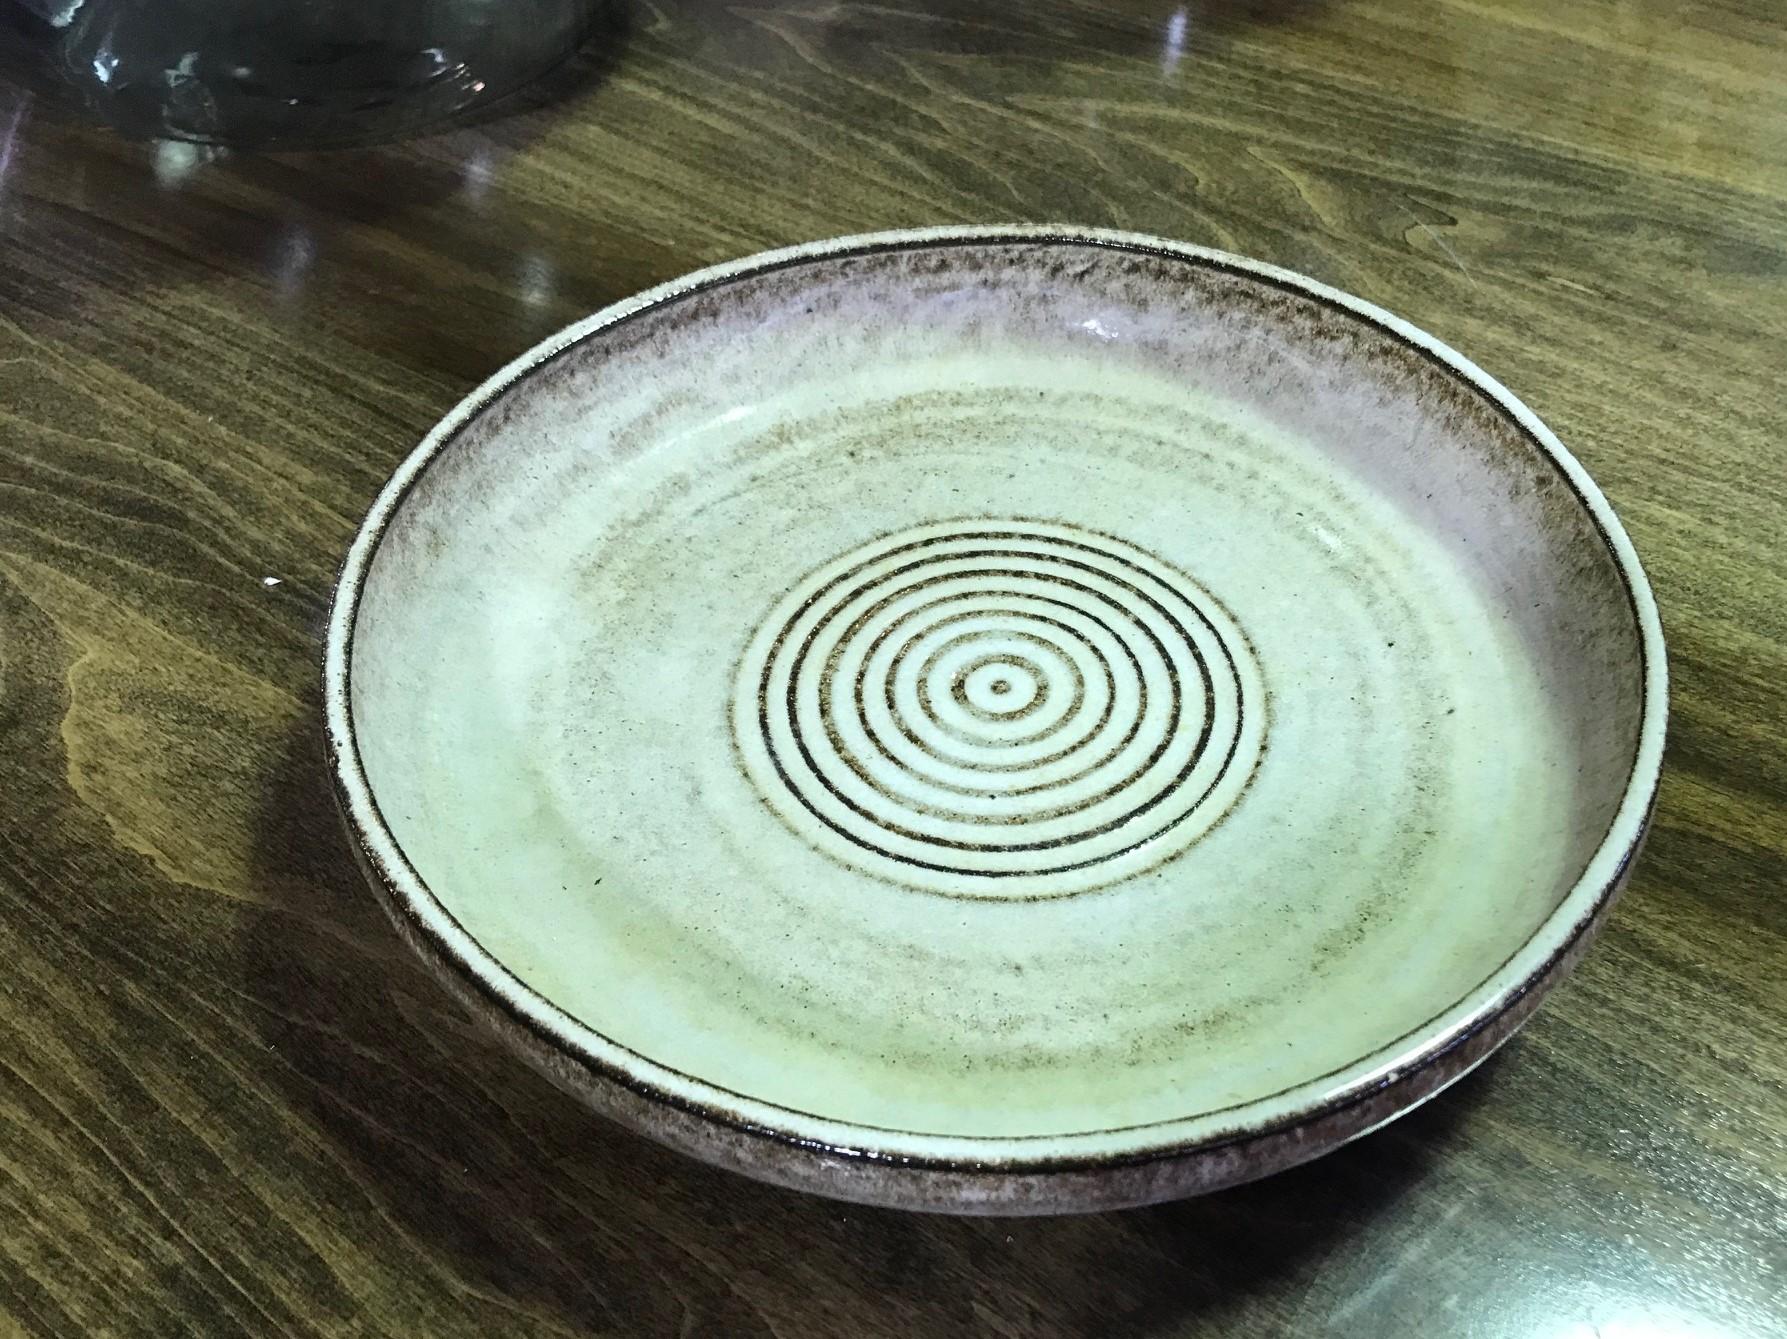 A wonderfully made and glazed large low bowl by renowned American potter Laura Andreson. Gorgeous in its Mid-Century Modern design and glowing pale color.

Signed and dated (1954) on the base by Andreson.

Would be a great addition to any